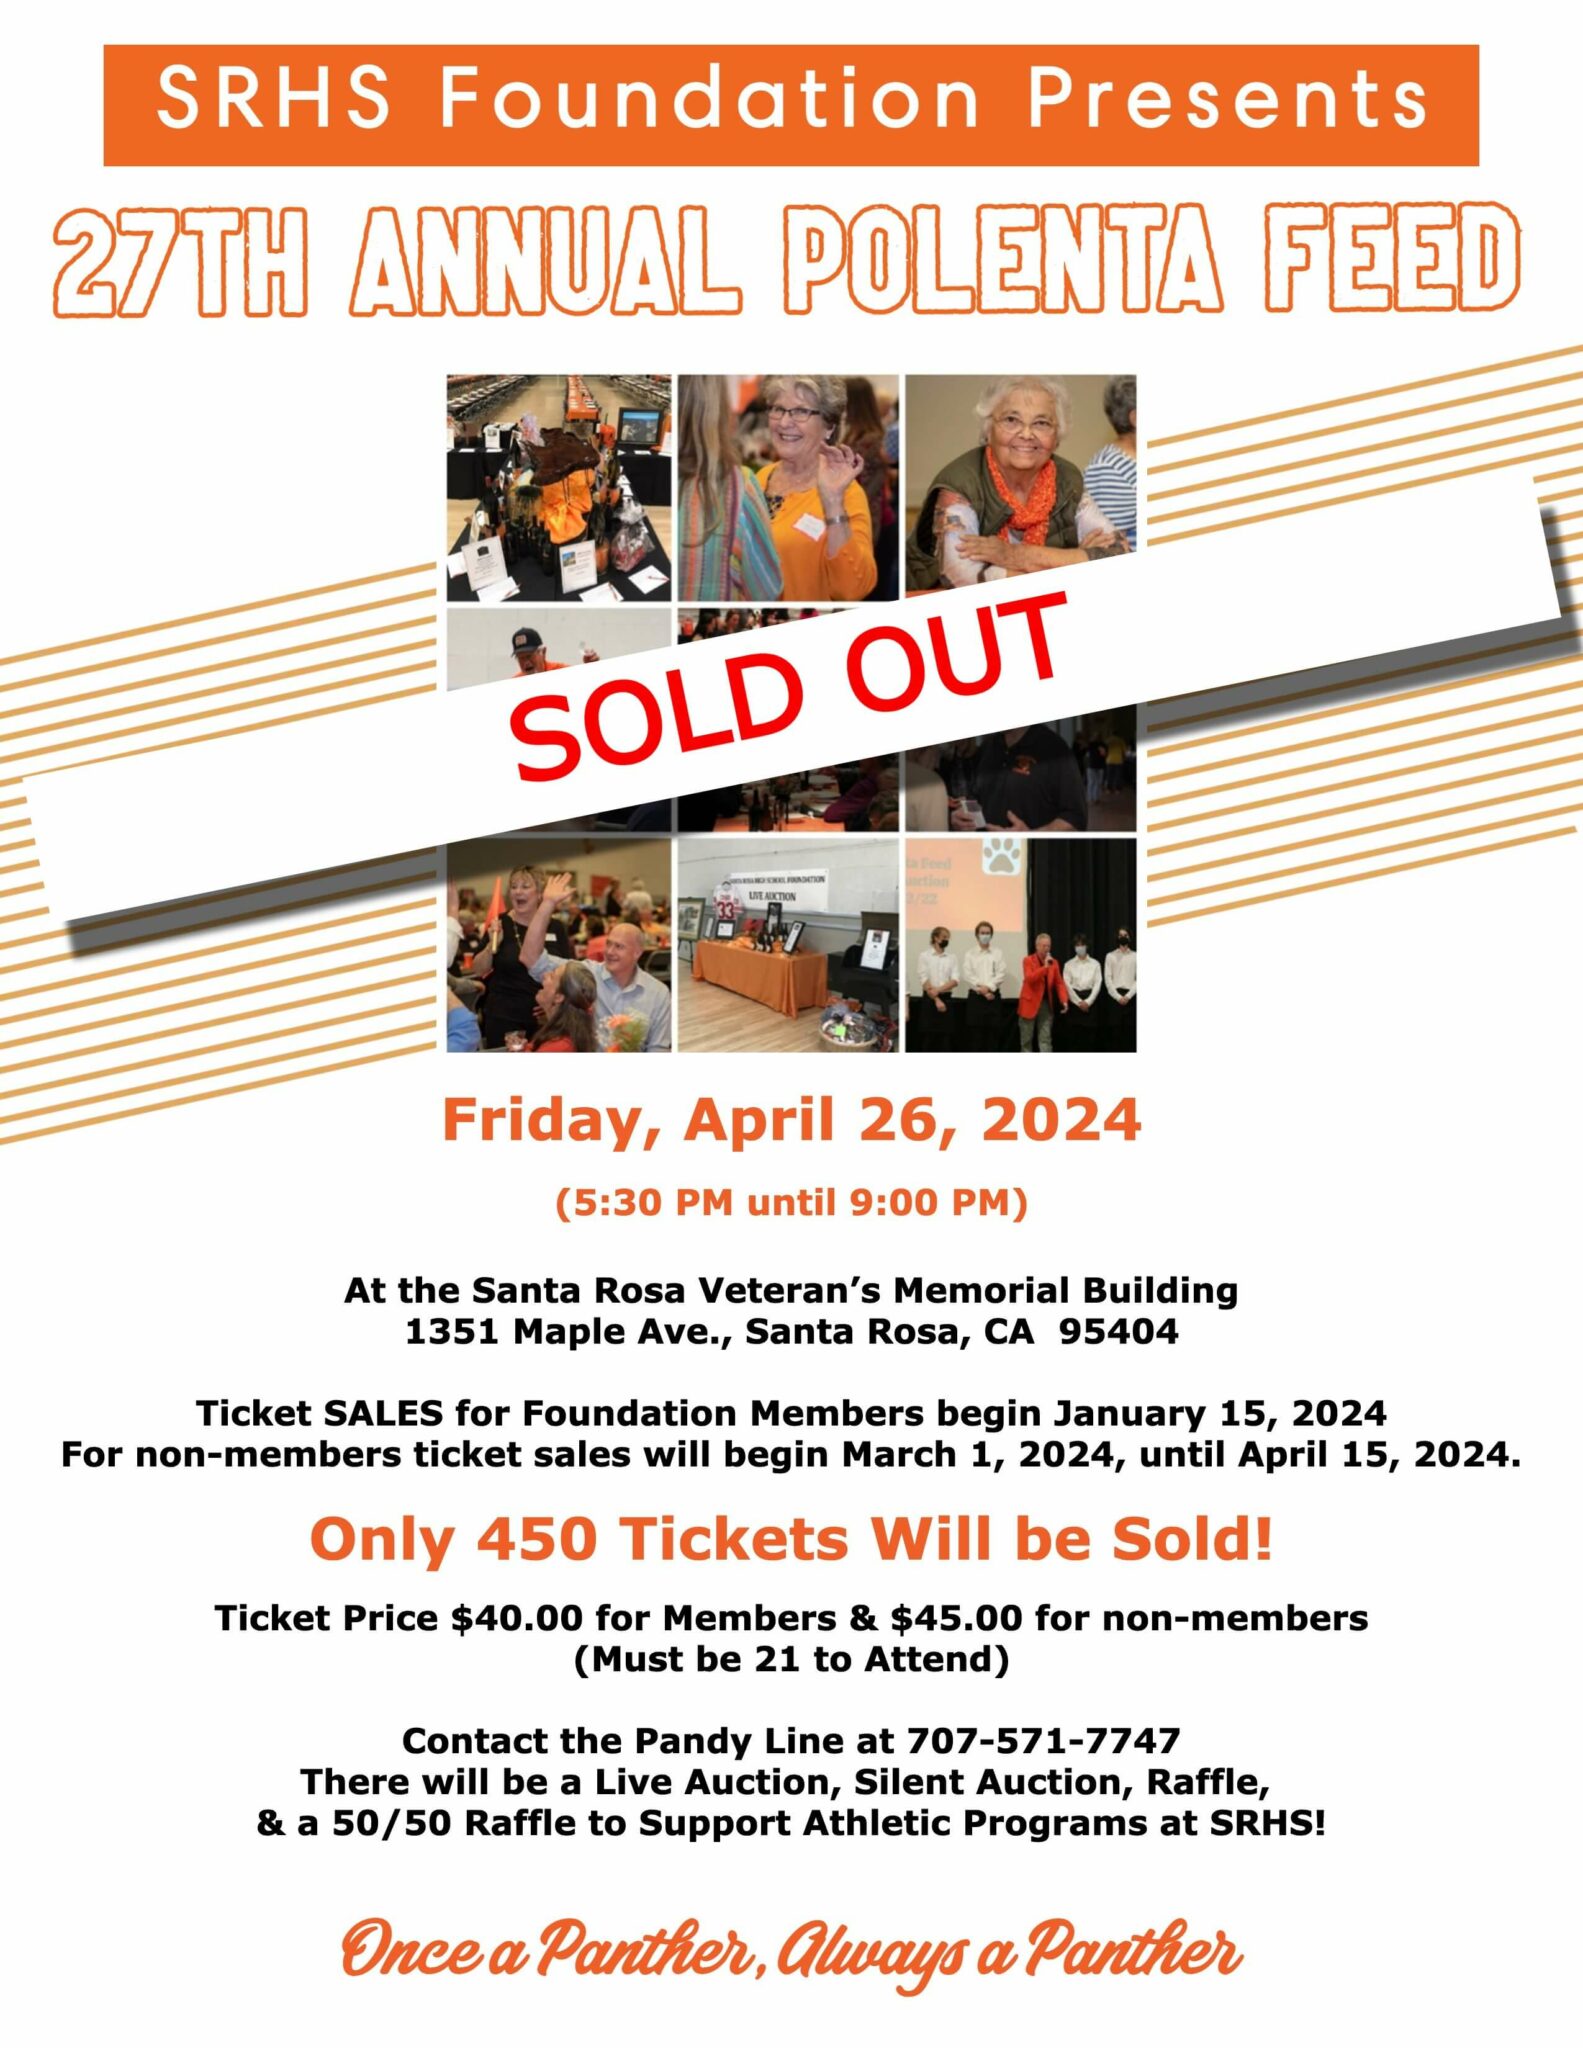 Poster for the 2024 Polenta Feed with Sold Out banner on top